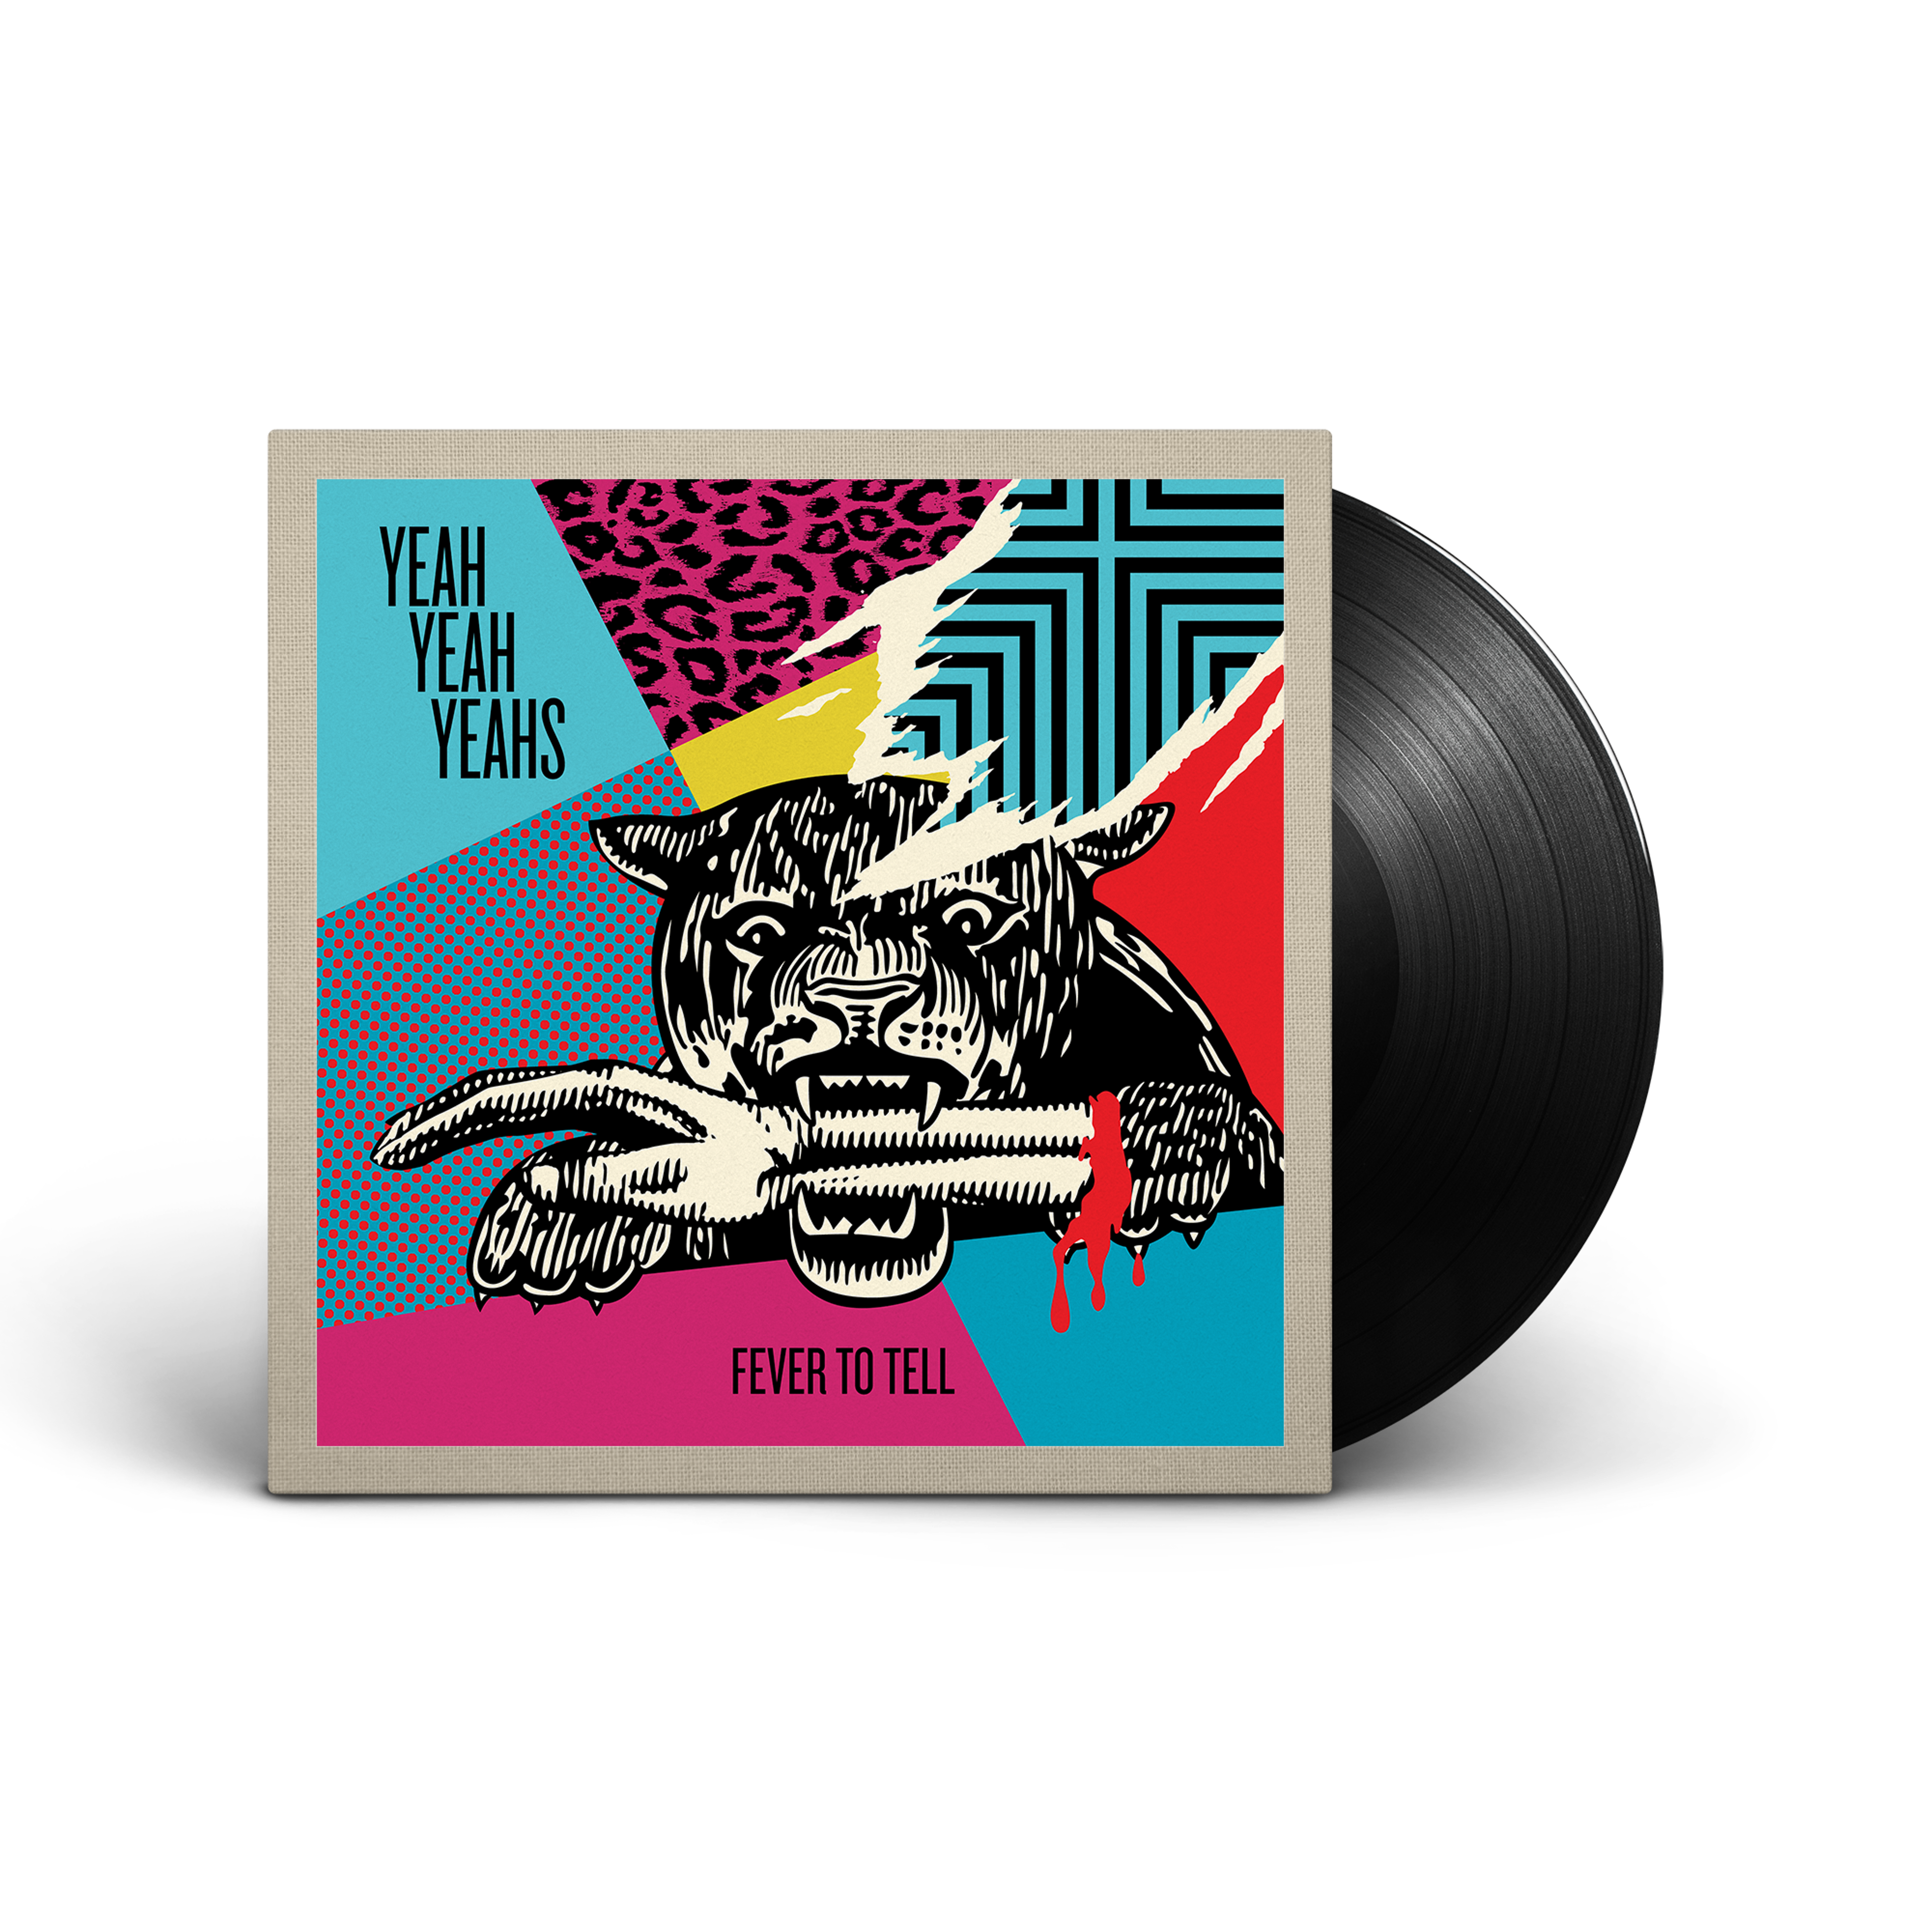 Yeah Yeah Yeahs - Fever to Tell by Shepard Fairey Gallery Vinyl